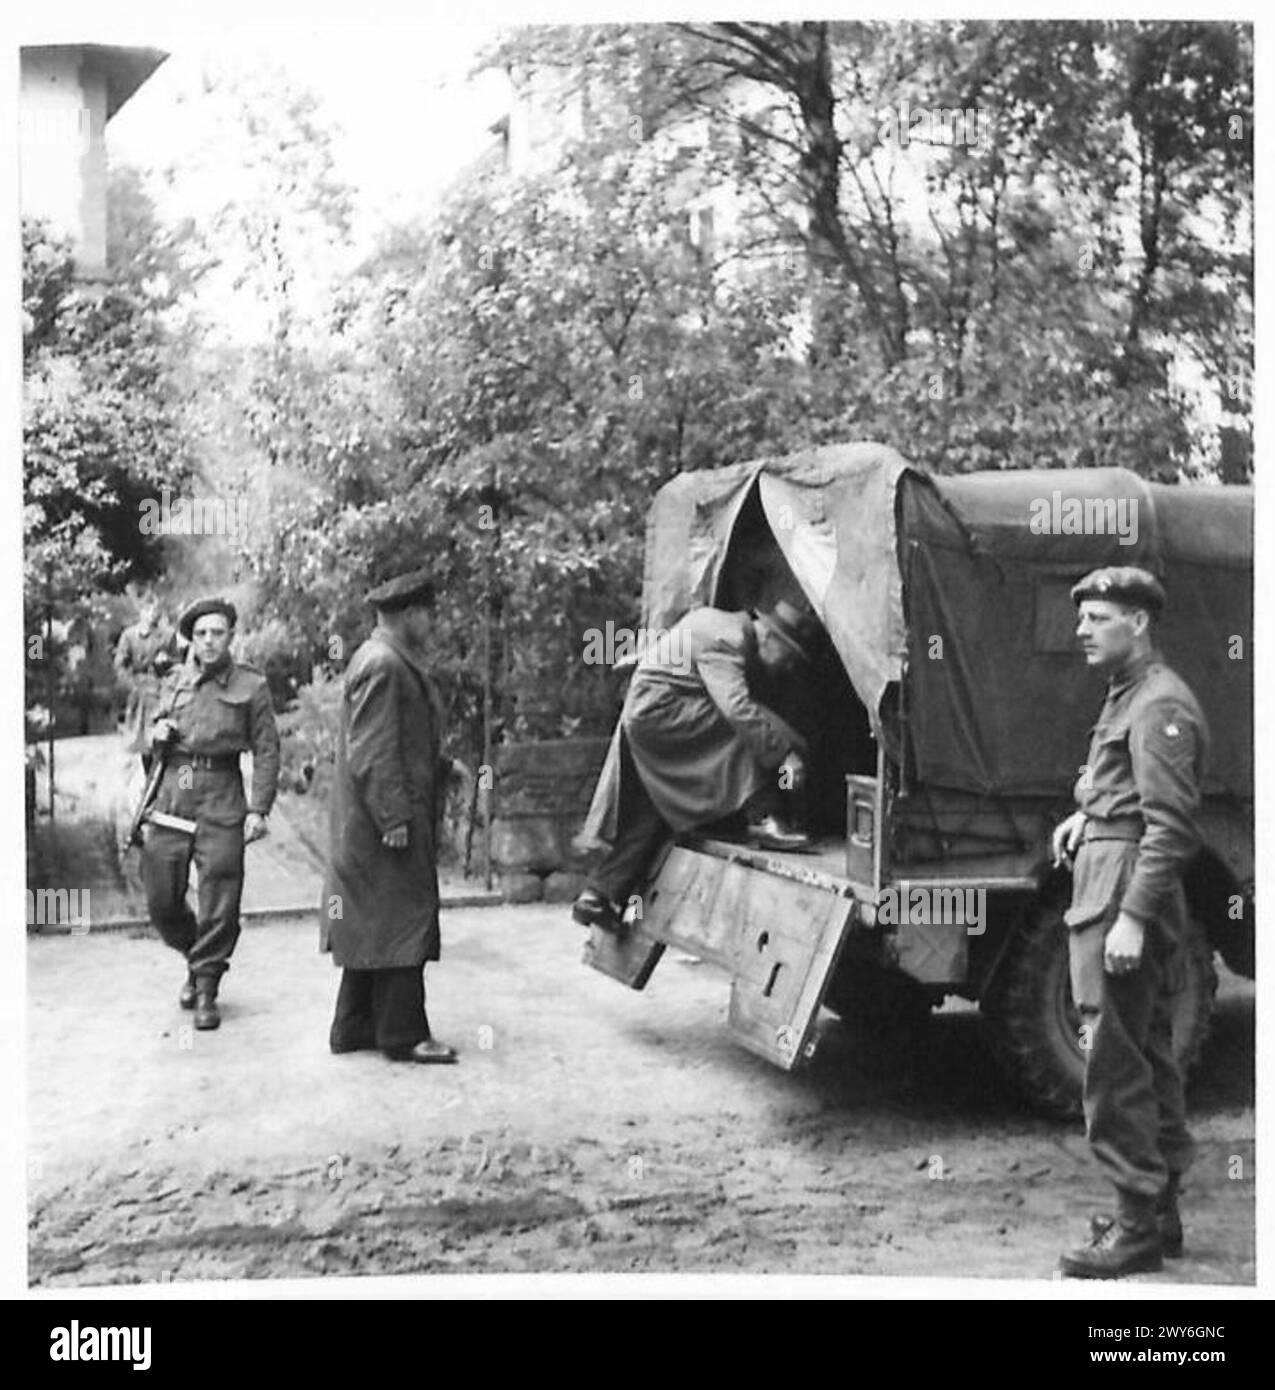 THE GREAT ROUND-UP - A bunch of ex-Gestapo Agents being herded into a truck at Flensburg for transportation to the Concentration Camp a few miles inside Denmark. , British Army, 21st Army Group Stock Photo